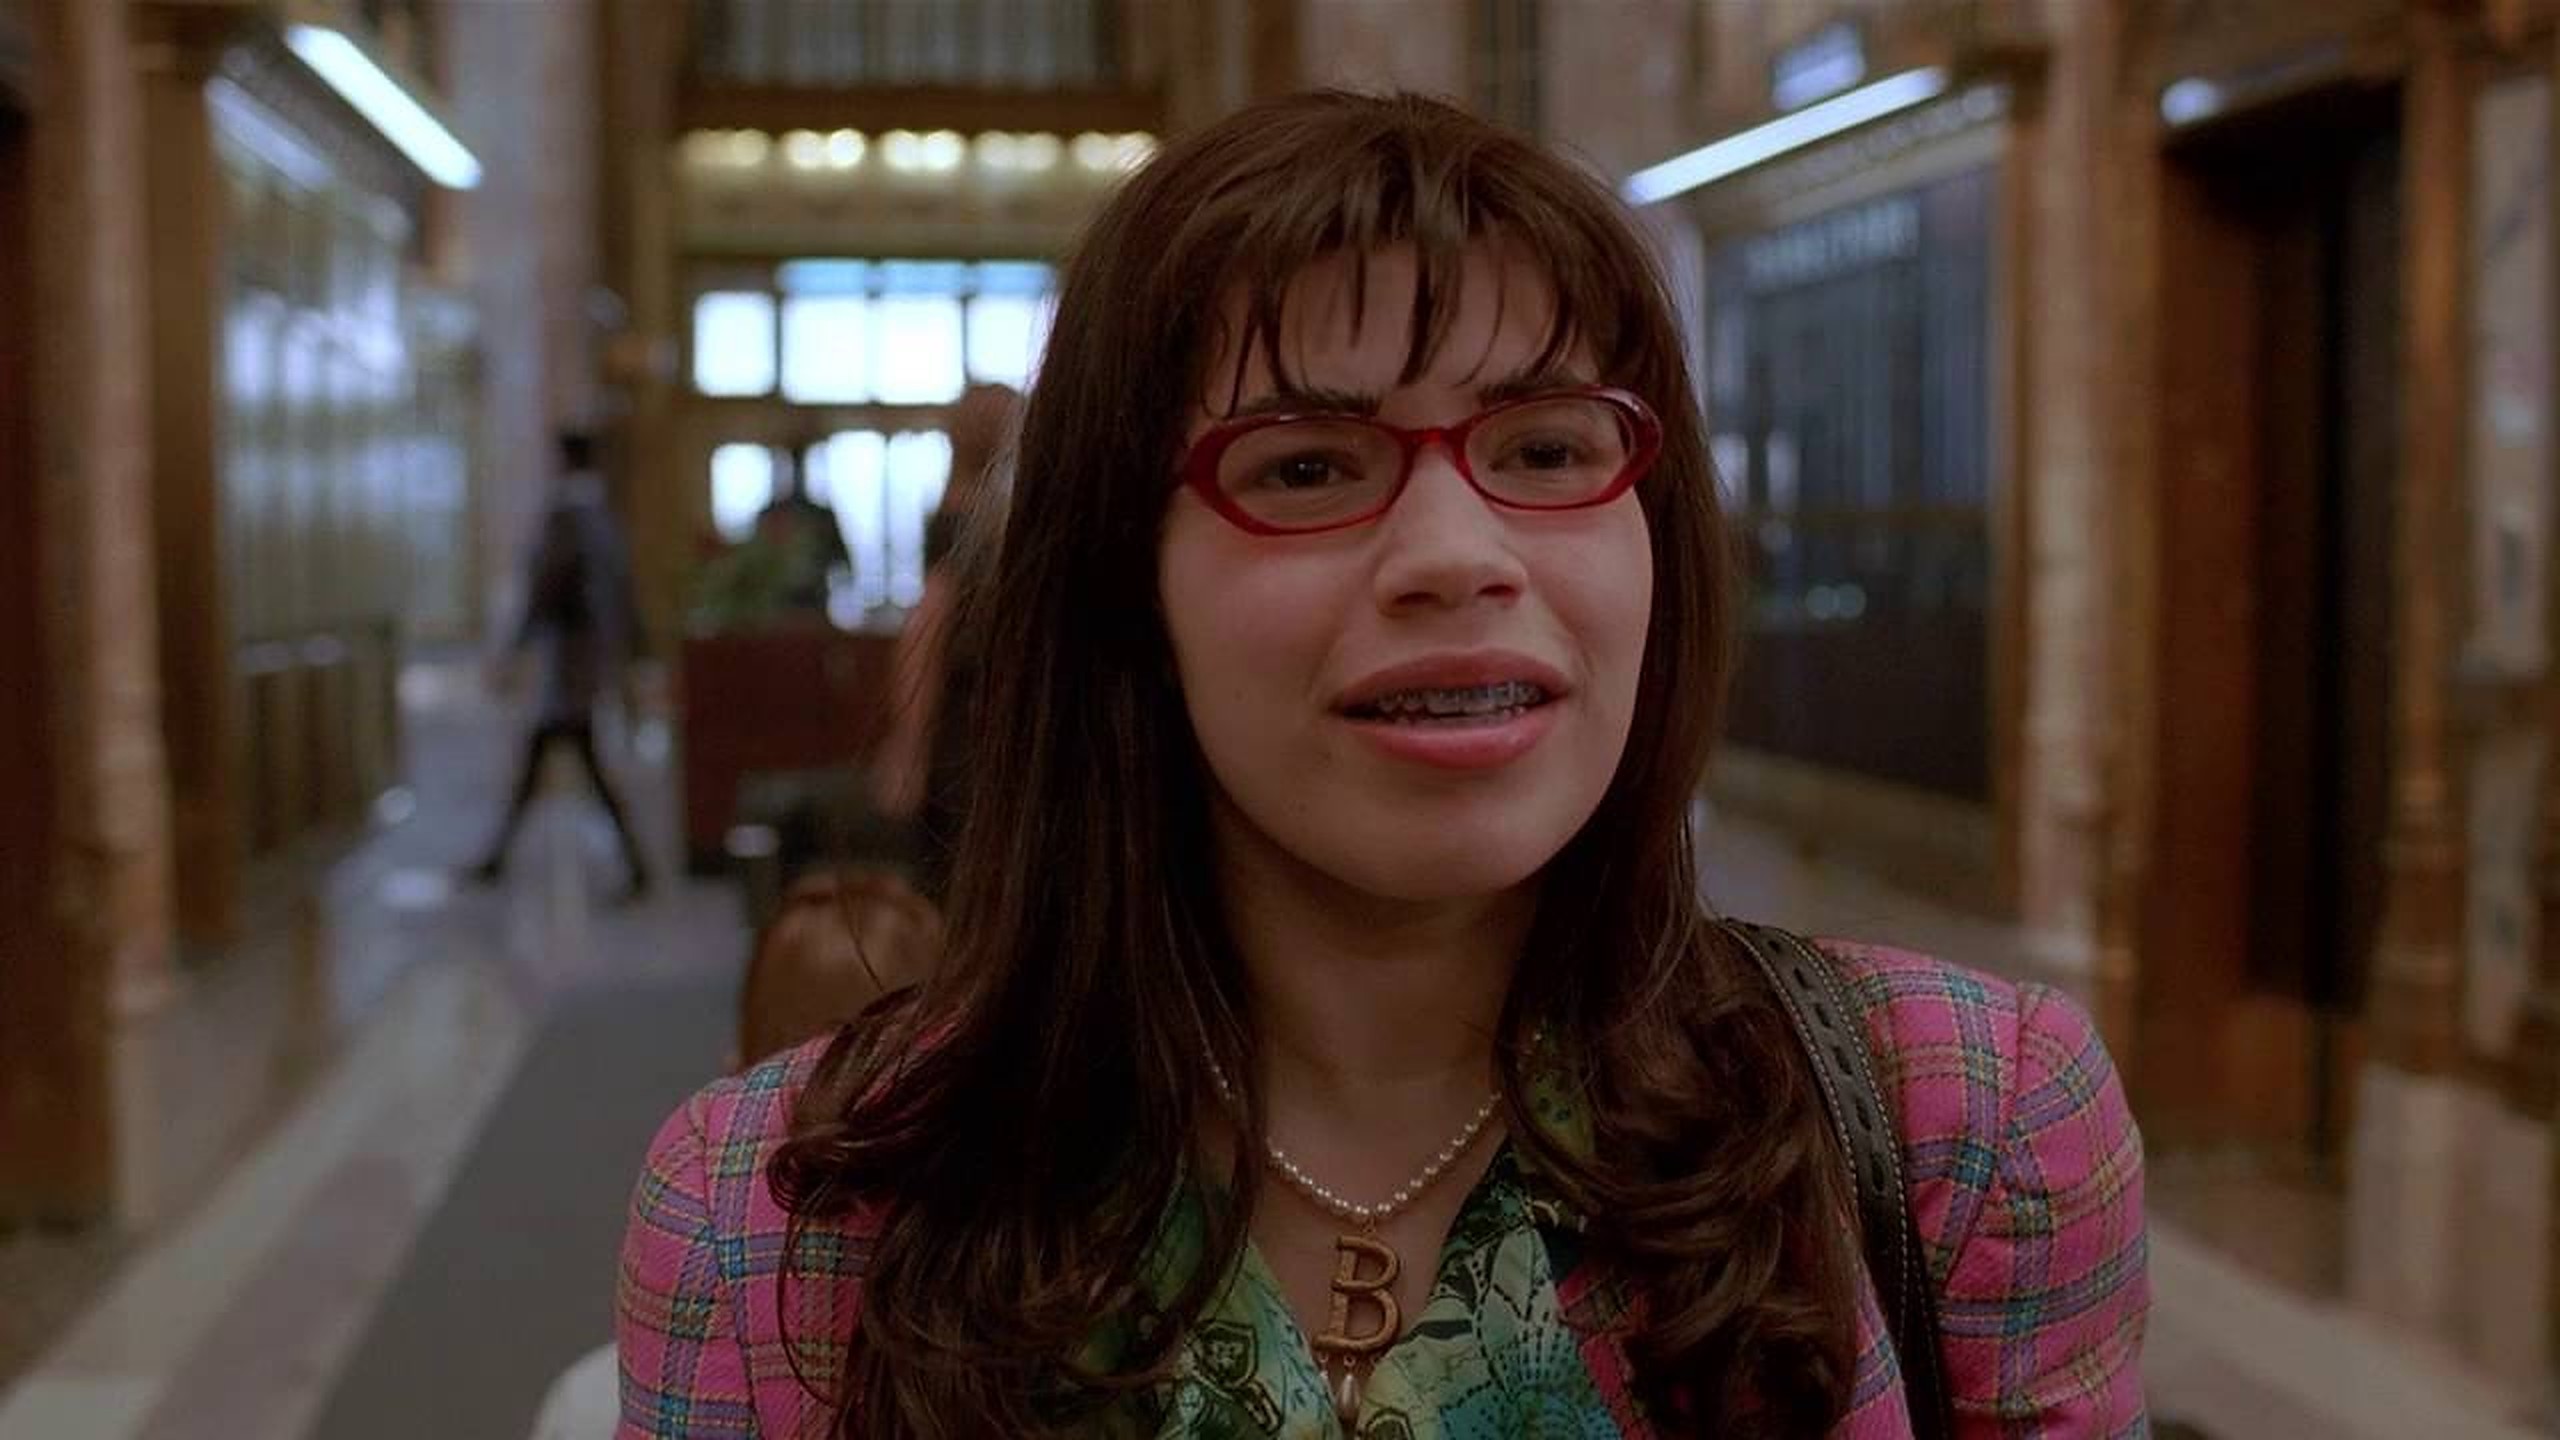 Ugly Betty: Is the TV Show Based on a Real Person?